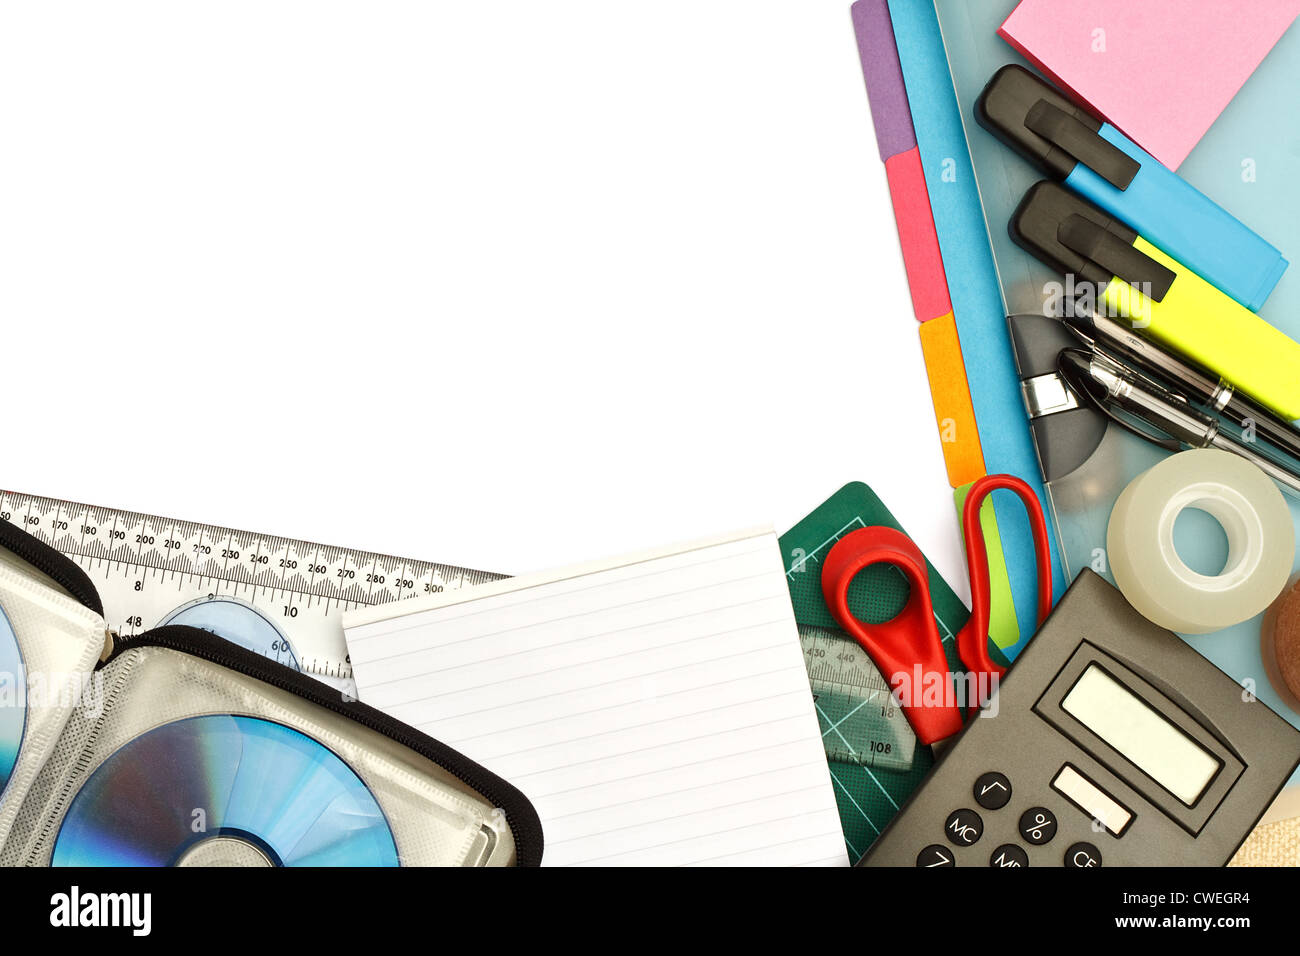 university student stationery or modern office supplies arranged on a desktop with blank area for text Stock Photo